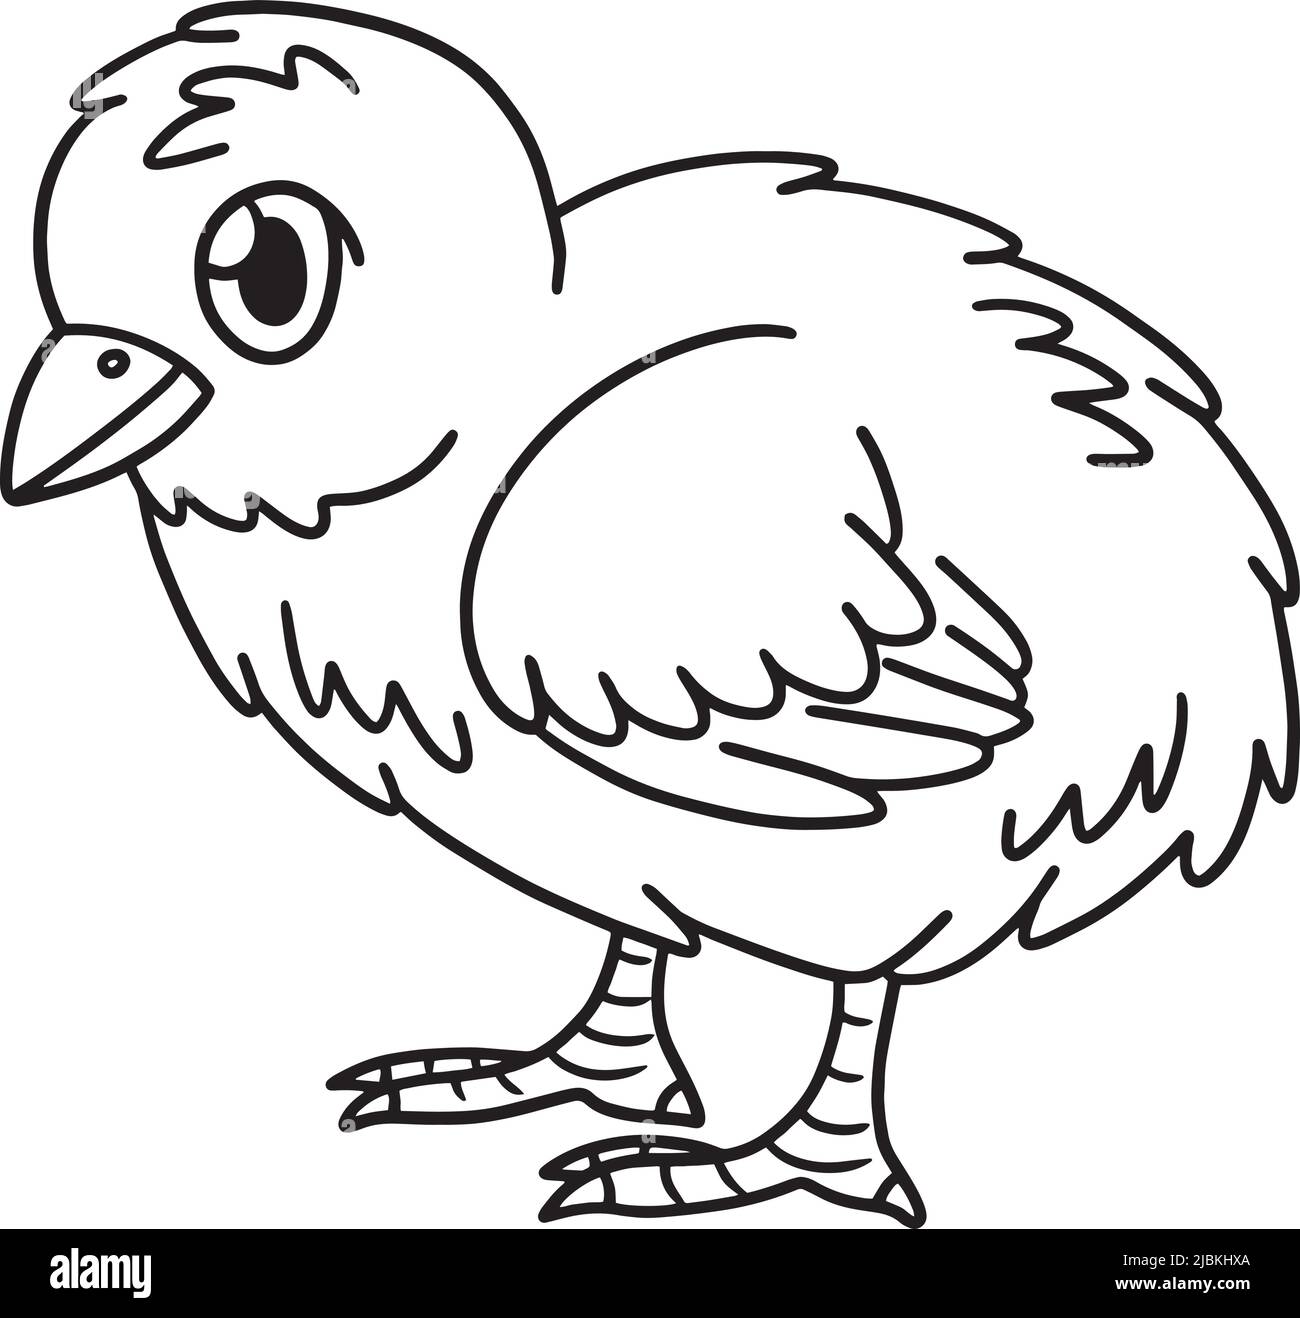 Chick Coloring Page Isolated for Kids Stock Vector